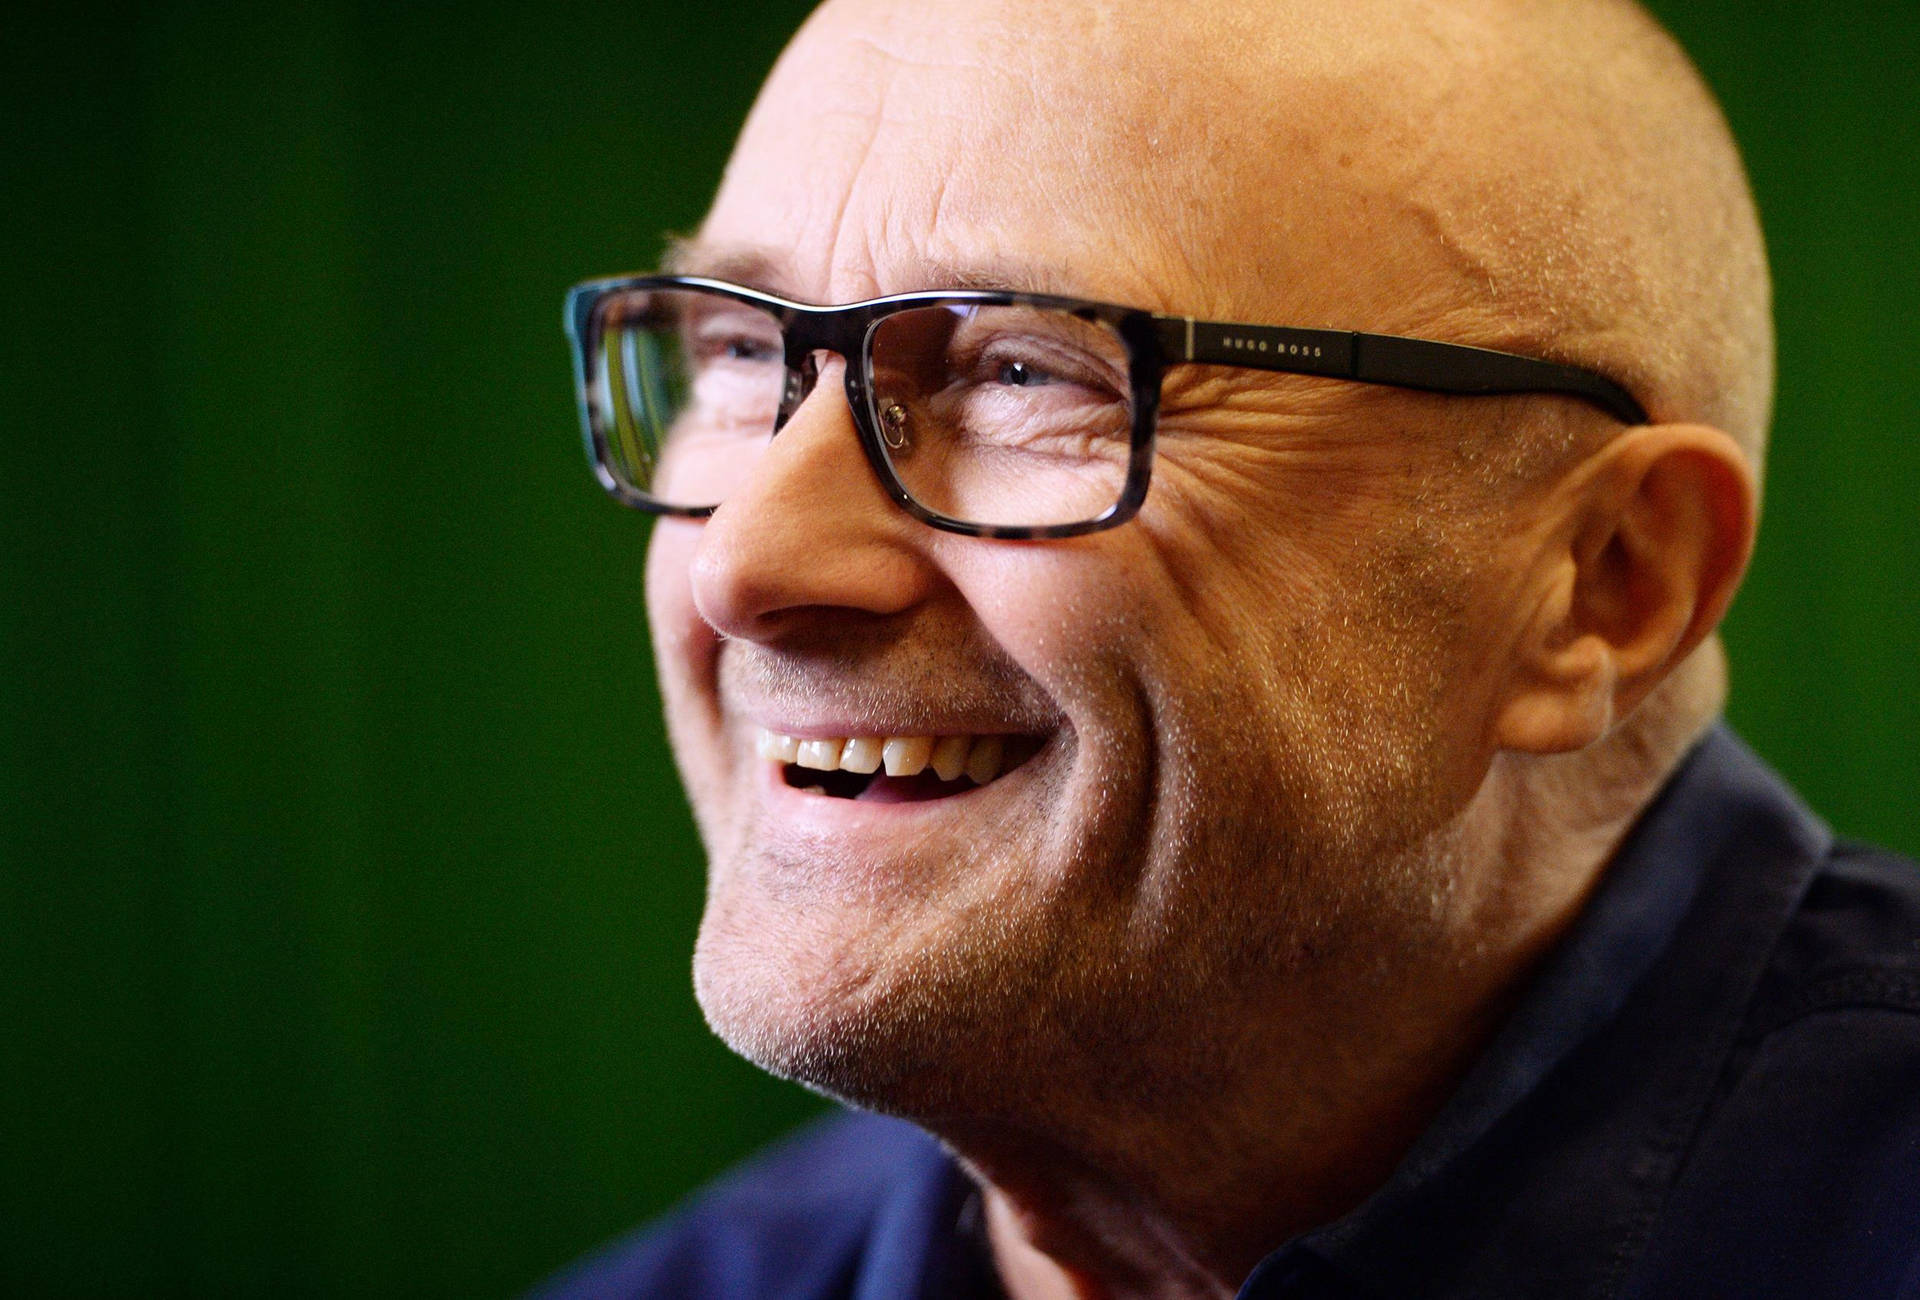 Acclaimed British Songwriter Phil Collins smiling for a portrait. Wallpaper